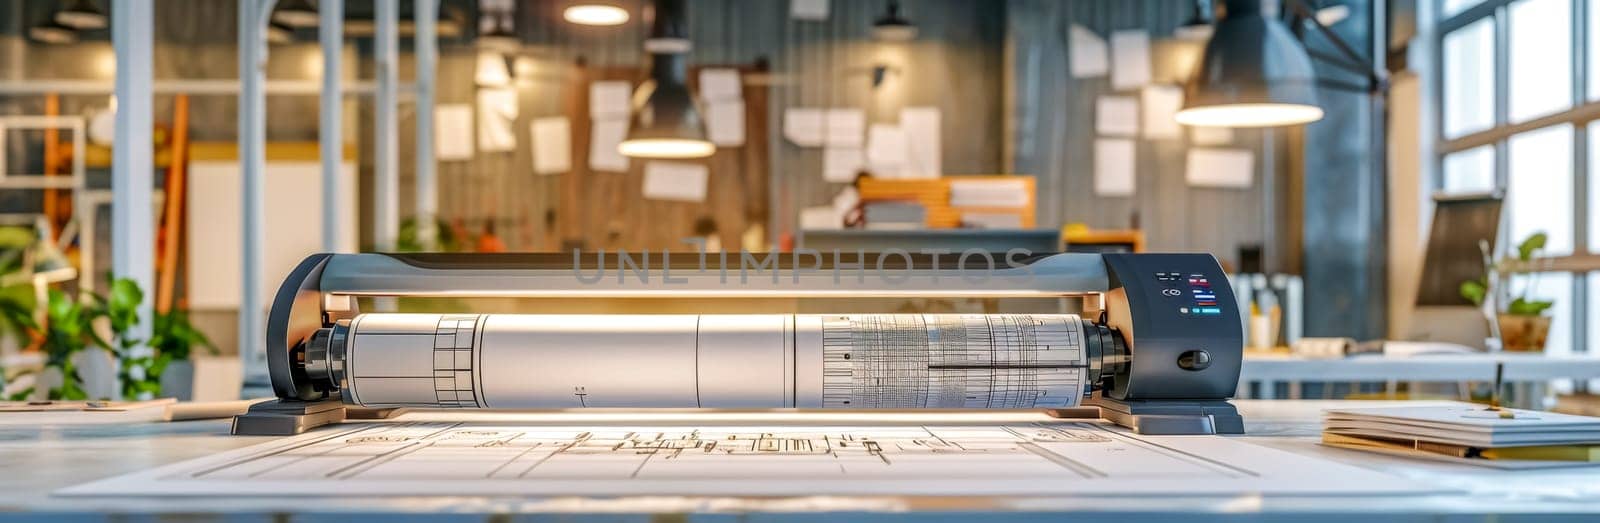 Professional plotter printing architectural plans in office by Edophoto